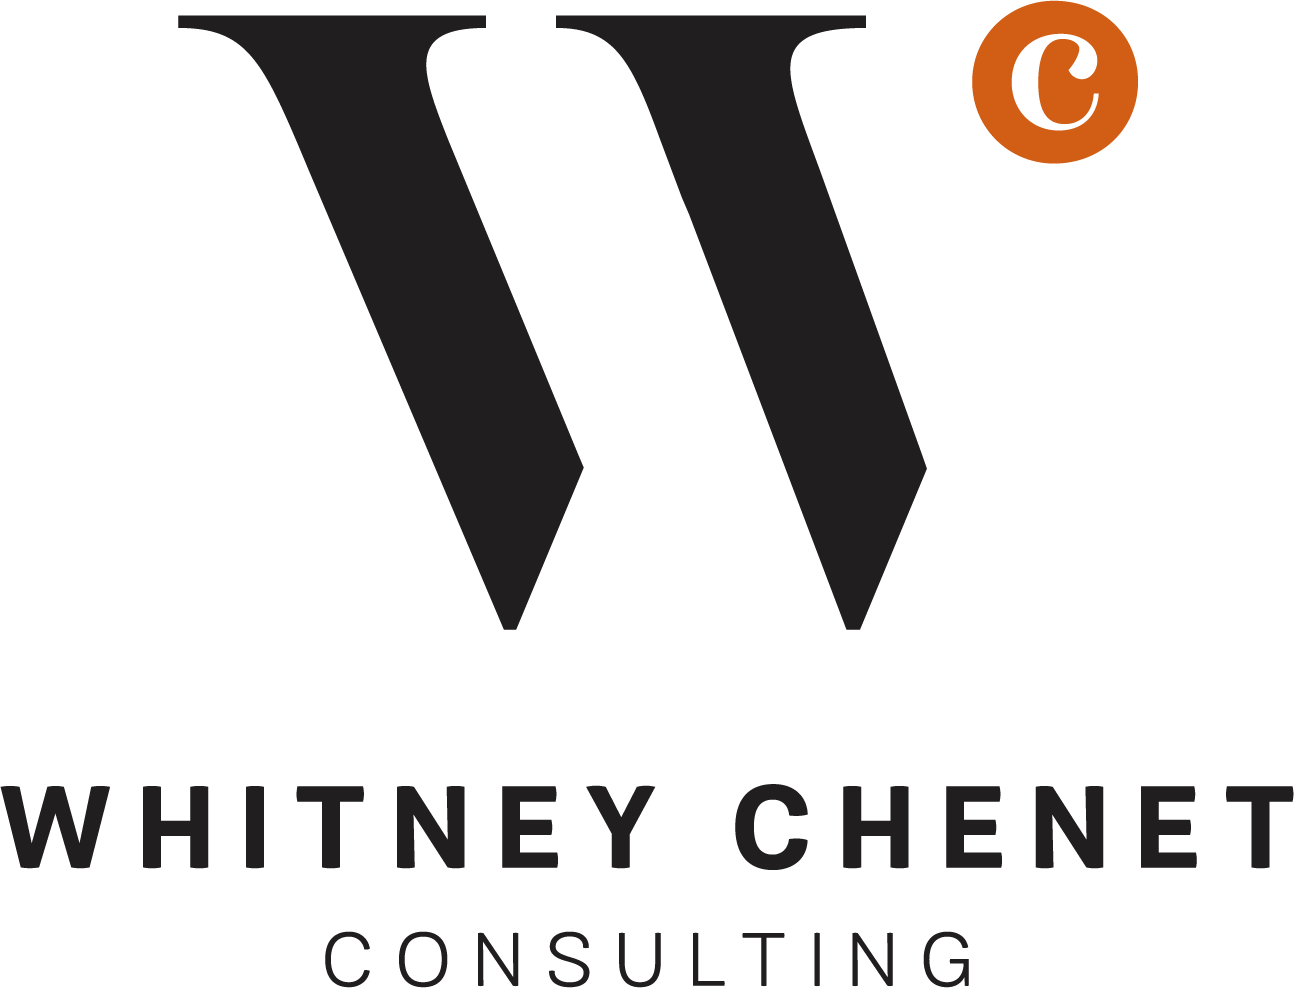 Whitney Chenet Consulting